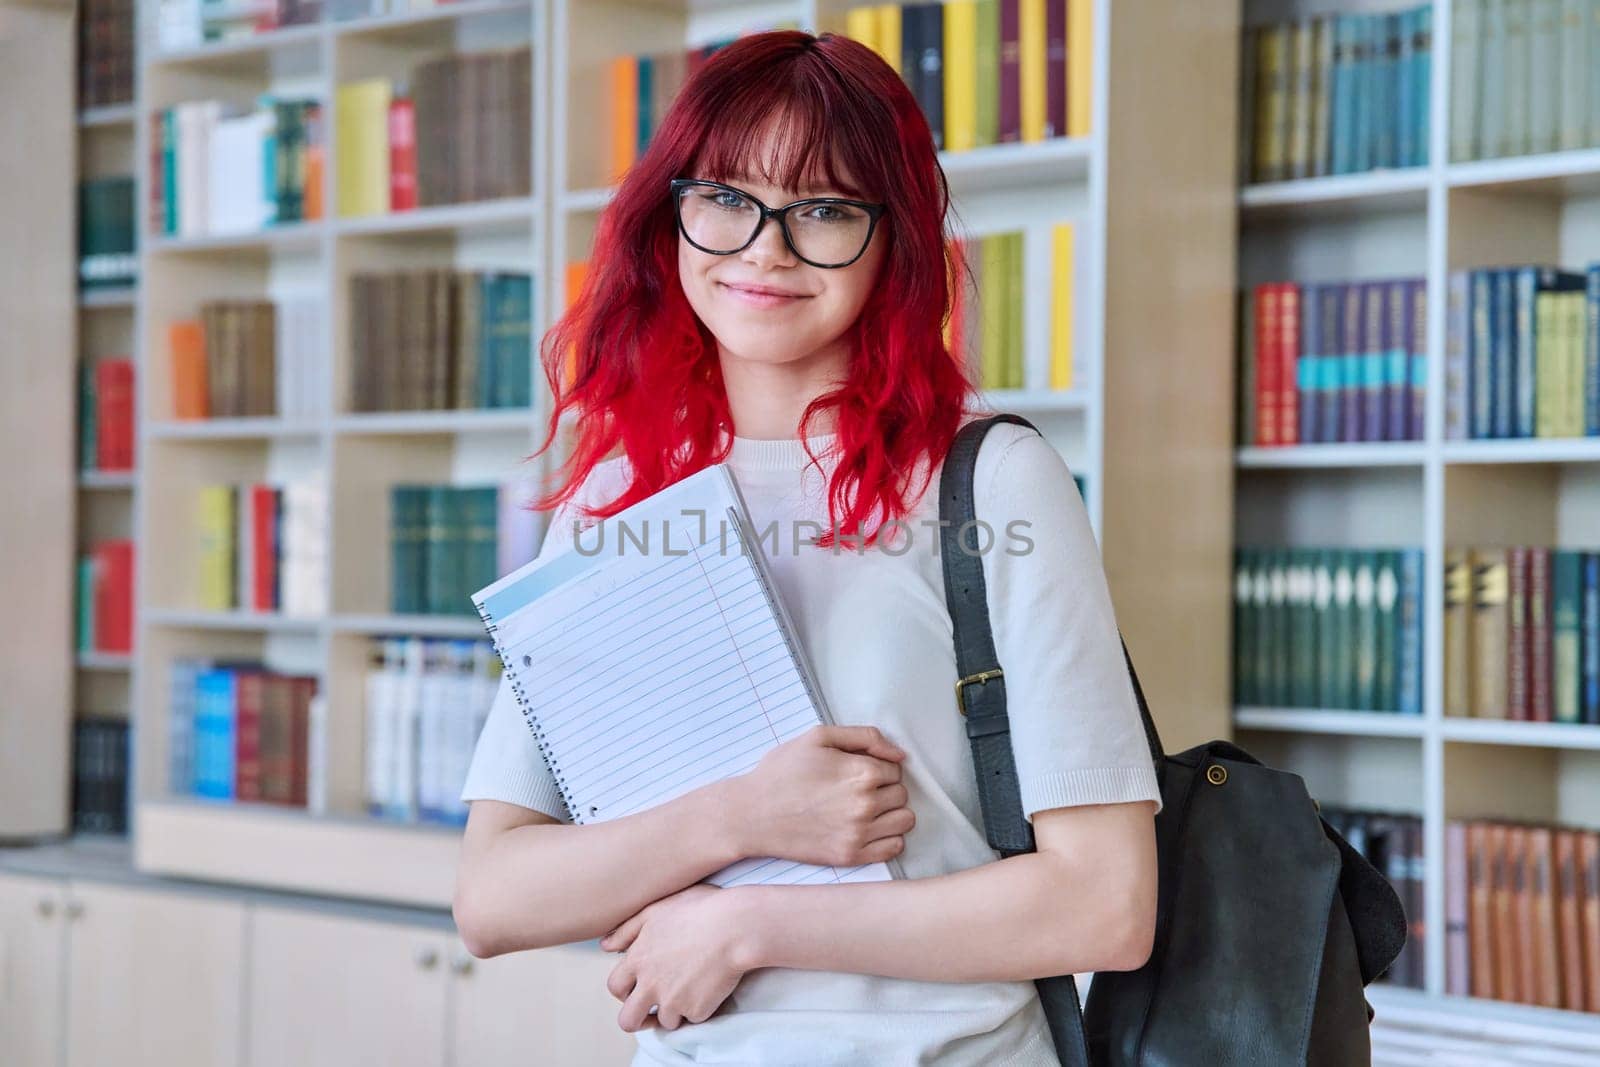 Portrait of teenage female student looking at camera in library. Smiling beautiful girl teenager wearing glasses, holding notebook backpack. College, university, education, knowledge, youth concept